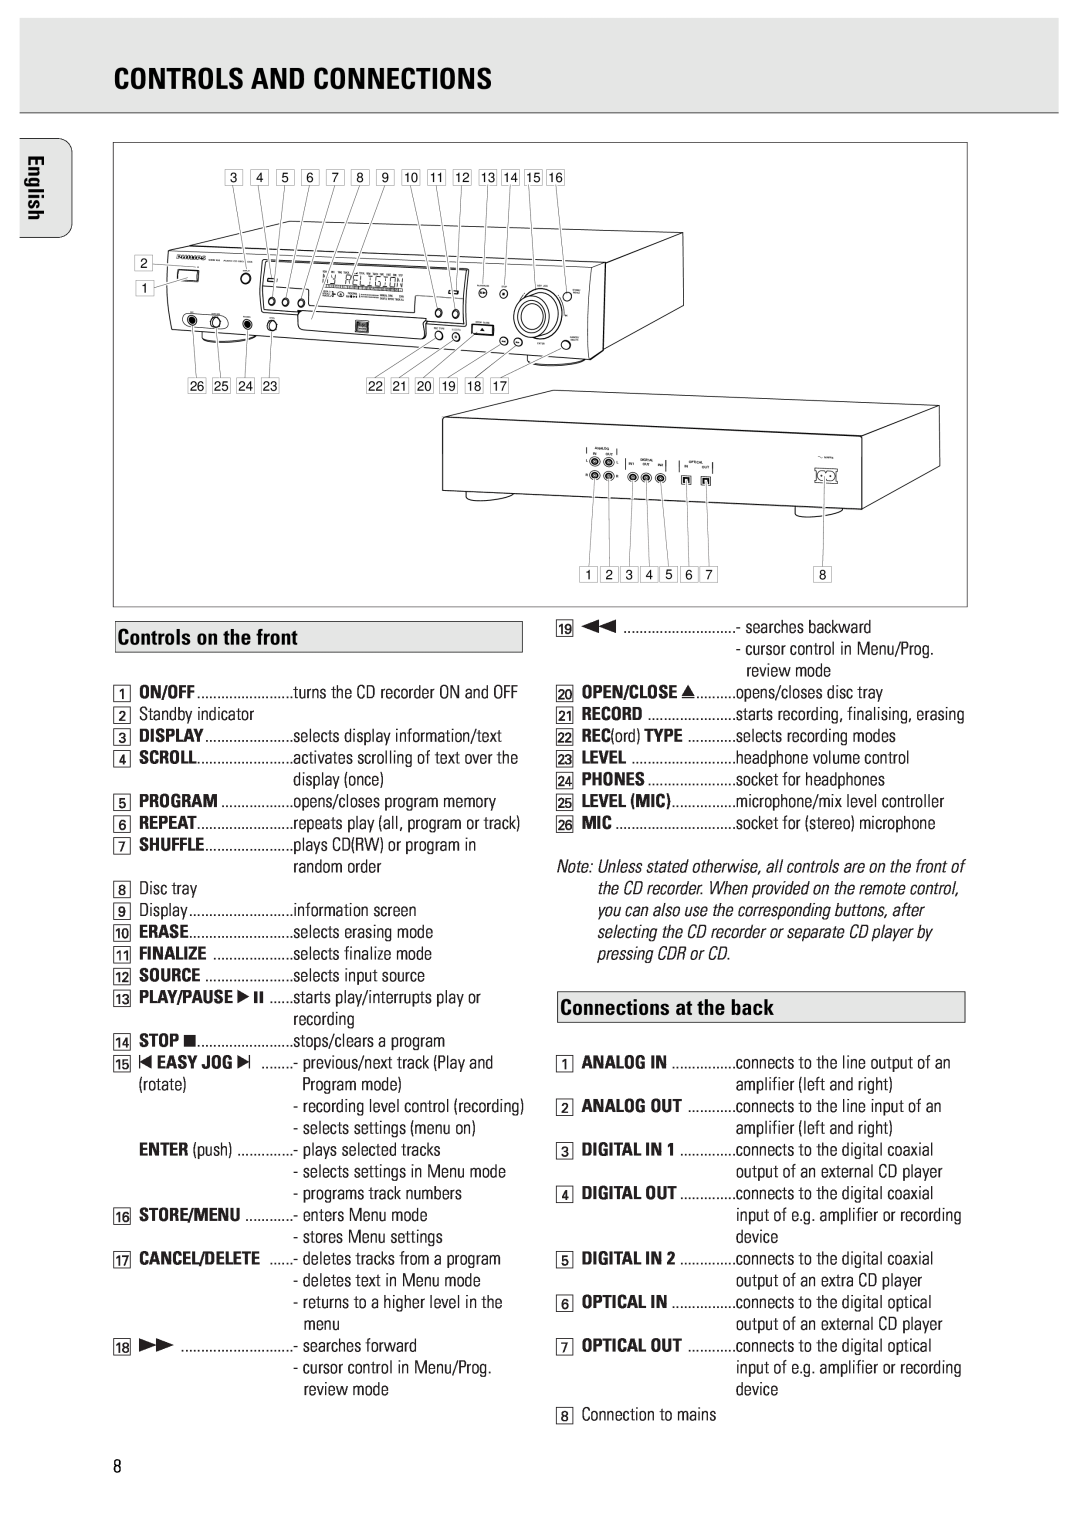 Philips CDR951 Controls And Connections, Controls on the front, Connections at the back, English, Program, Store/Menu 